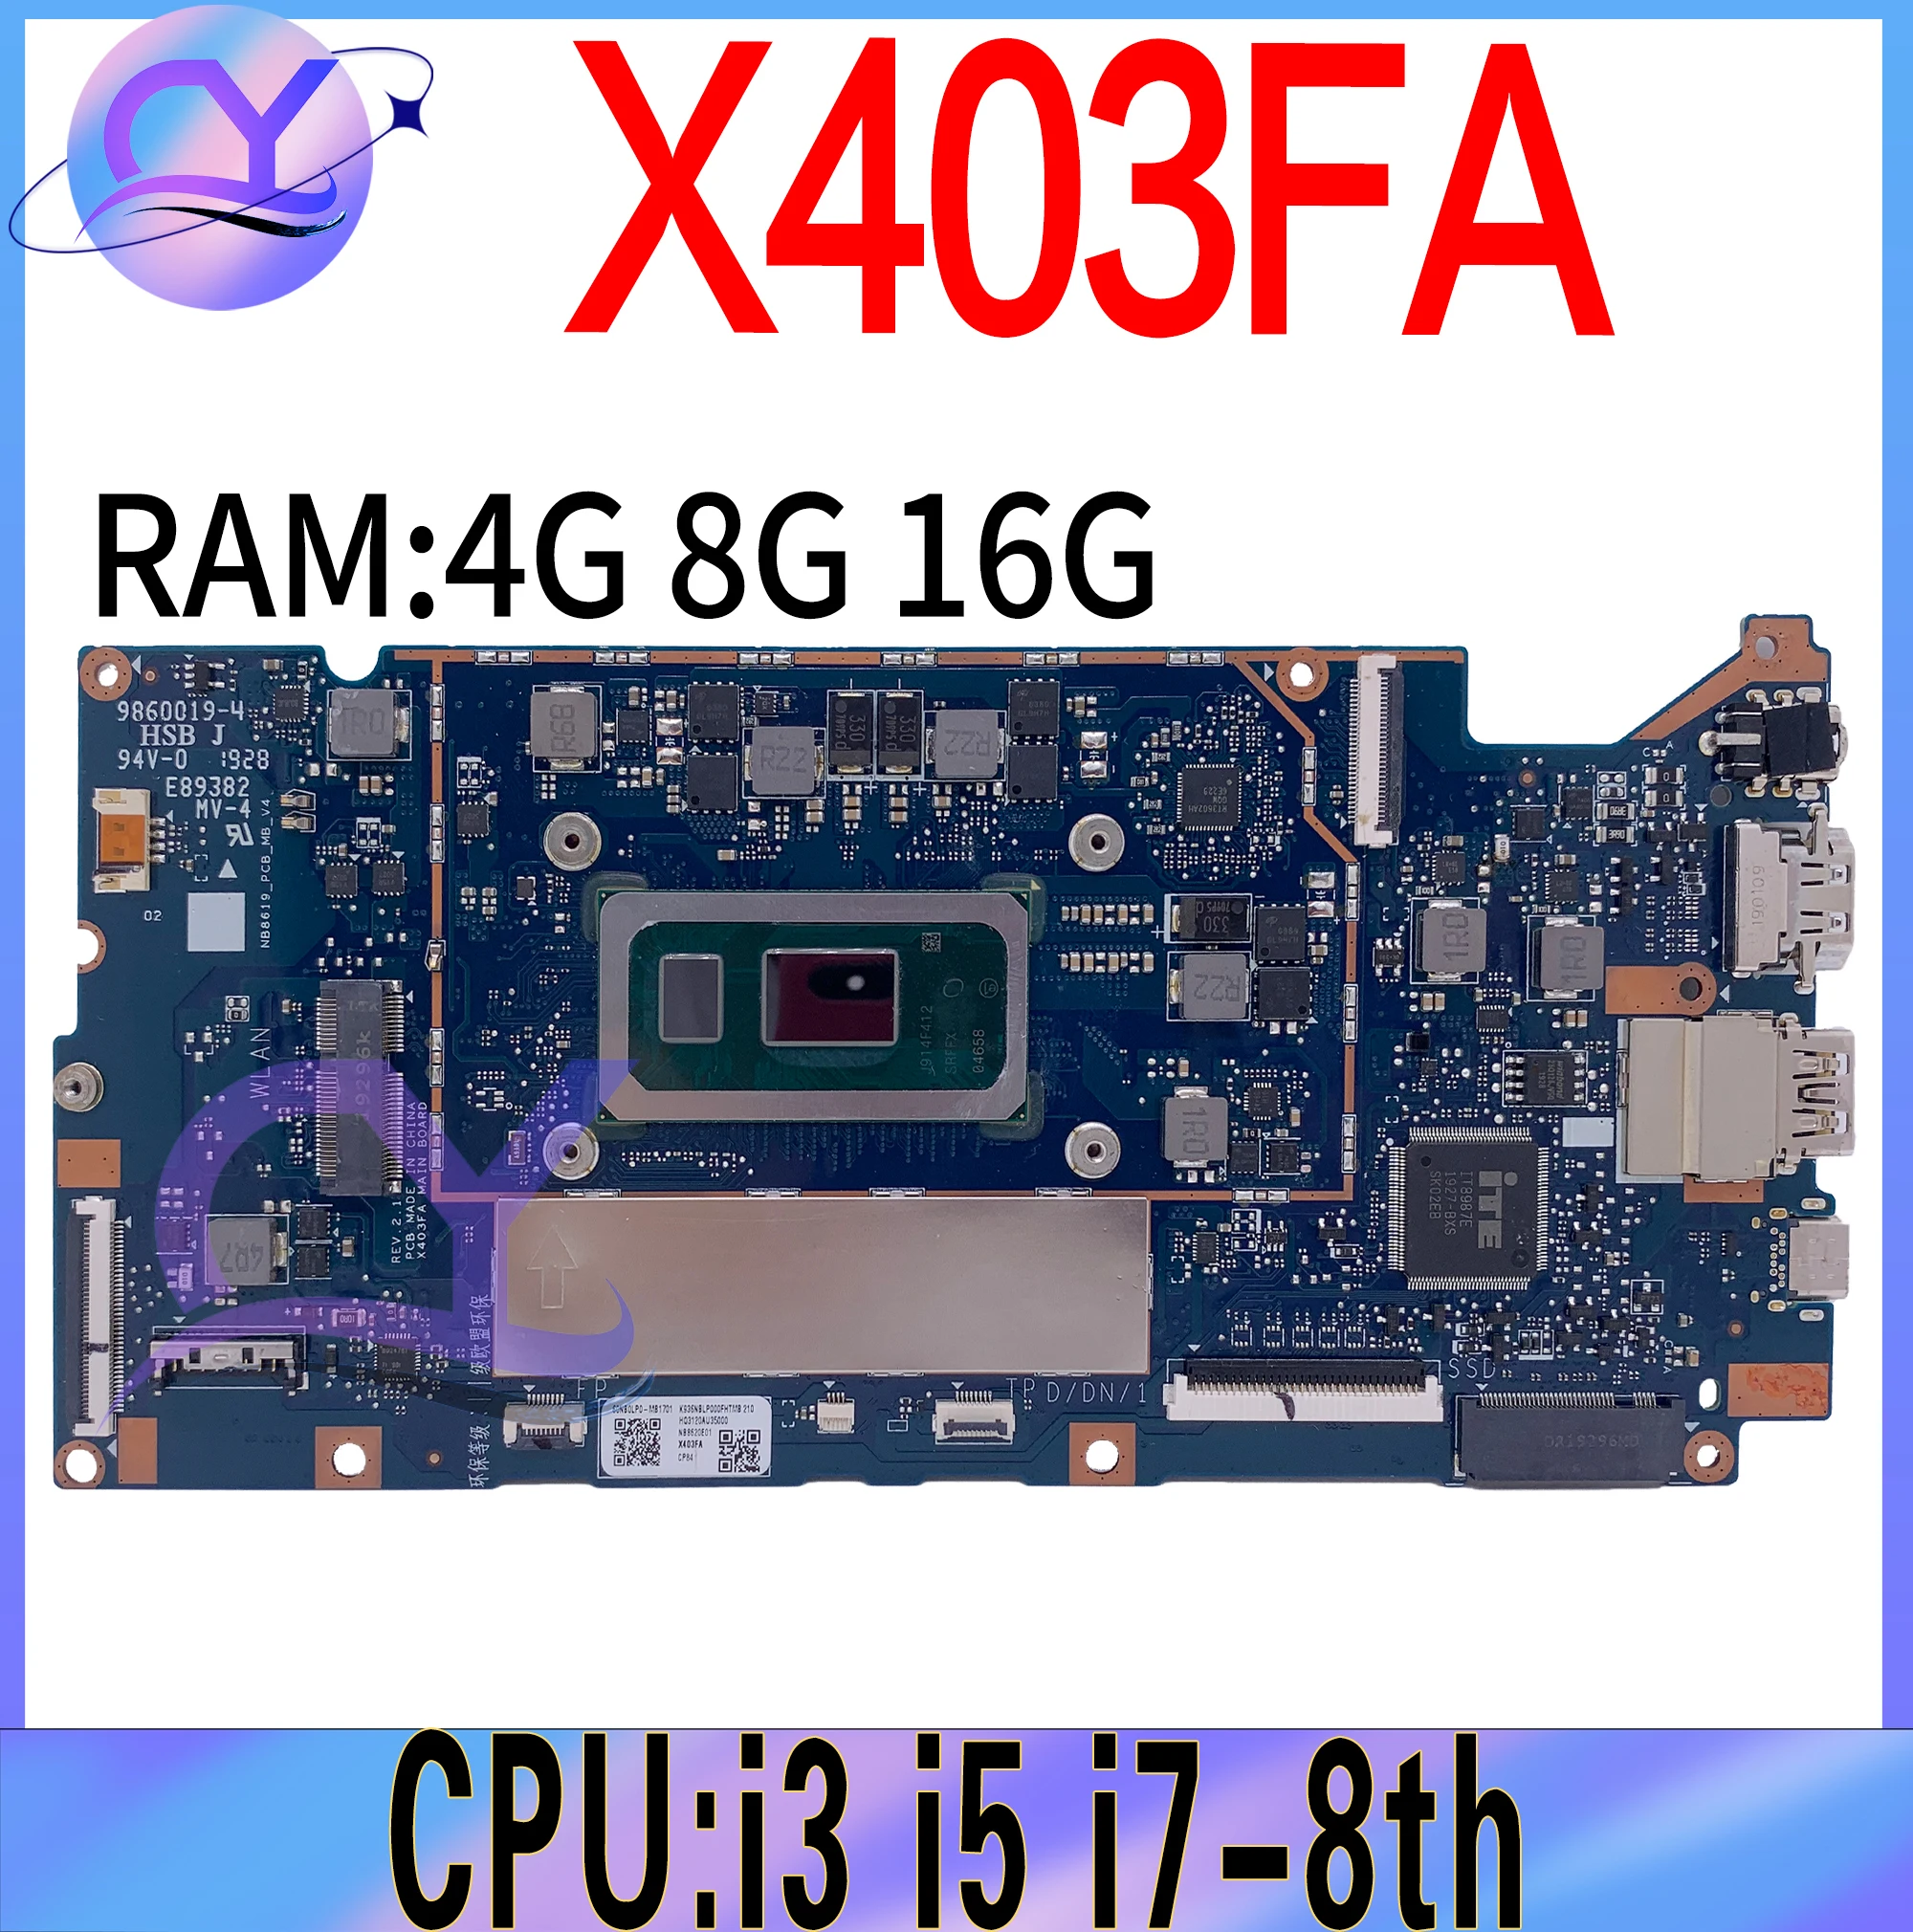 

X403FA Notebook Mainboard For ASUS VivoBook-14 X403 X403F L403FA L403FAC X403FAC Laptop Motherboard With i3 i5 i7-8th 4G 8G 16G